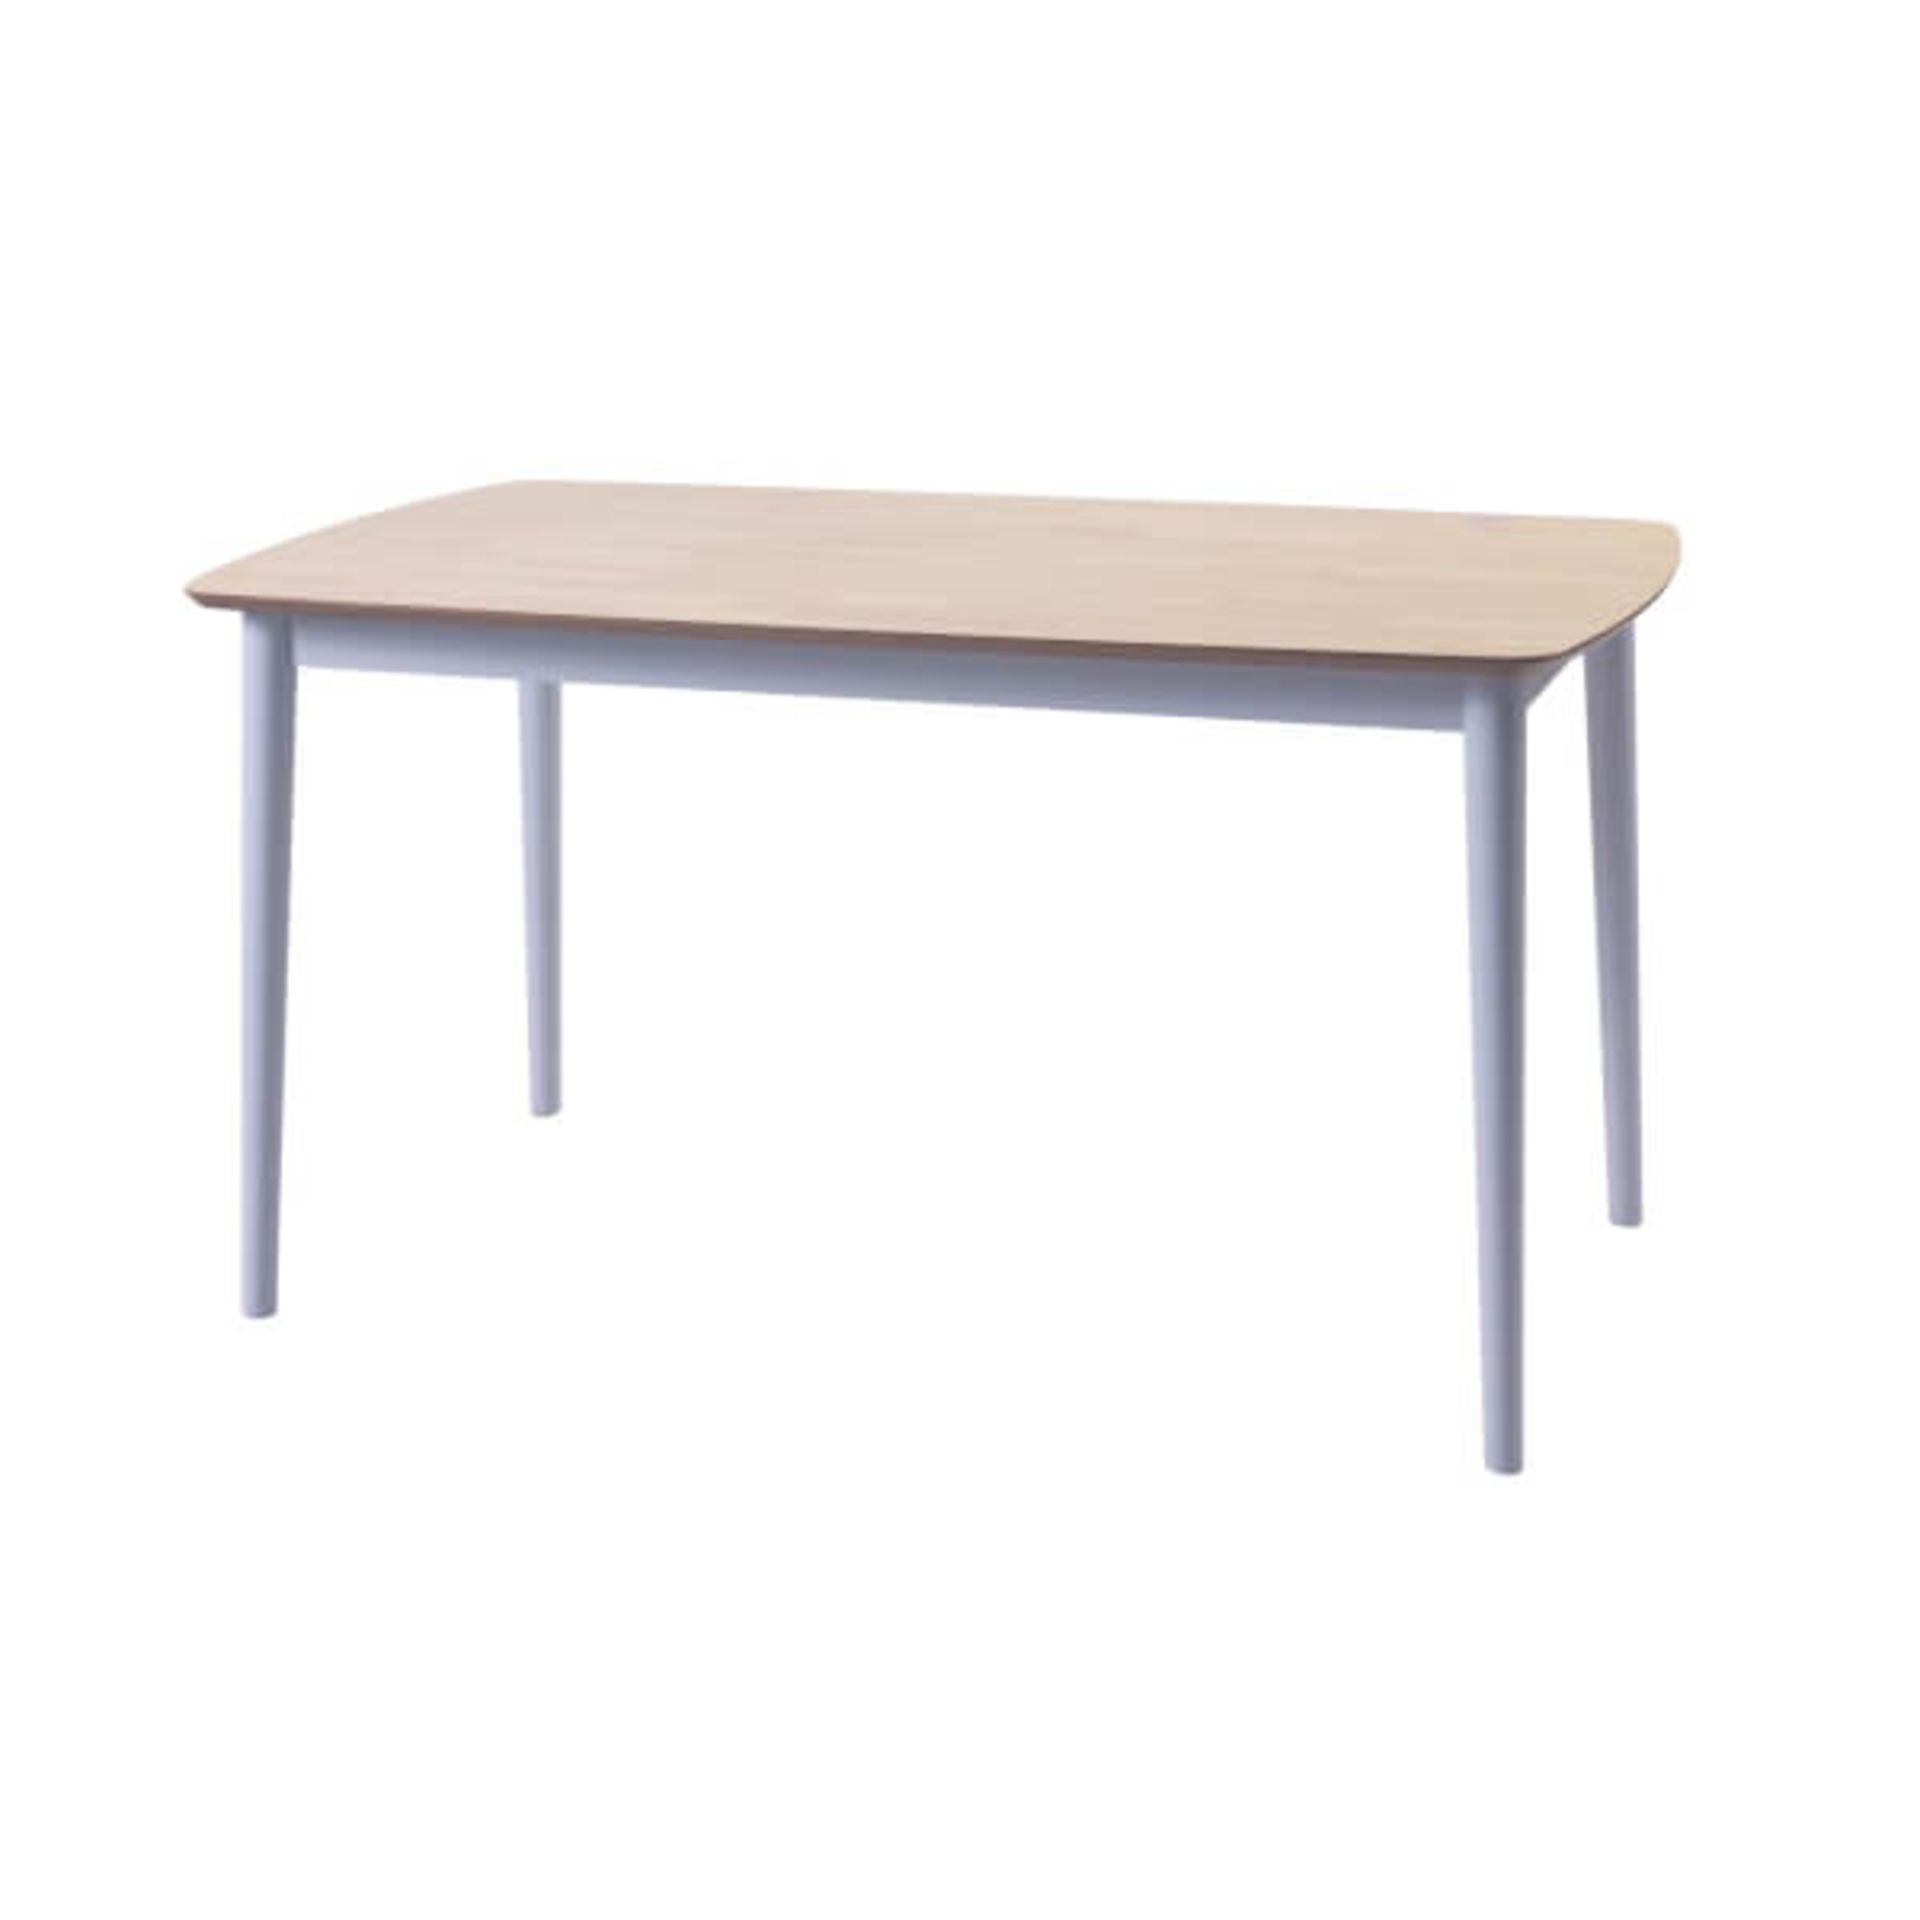 (16) 1x Hugo Dining Table. (H75x W140x D80cm). Wood Veneer Natural Table Top. Grey Painted Rubber W - Image 2 of 3